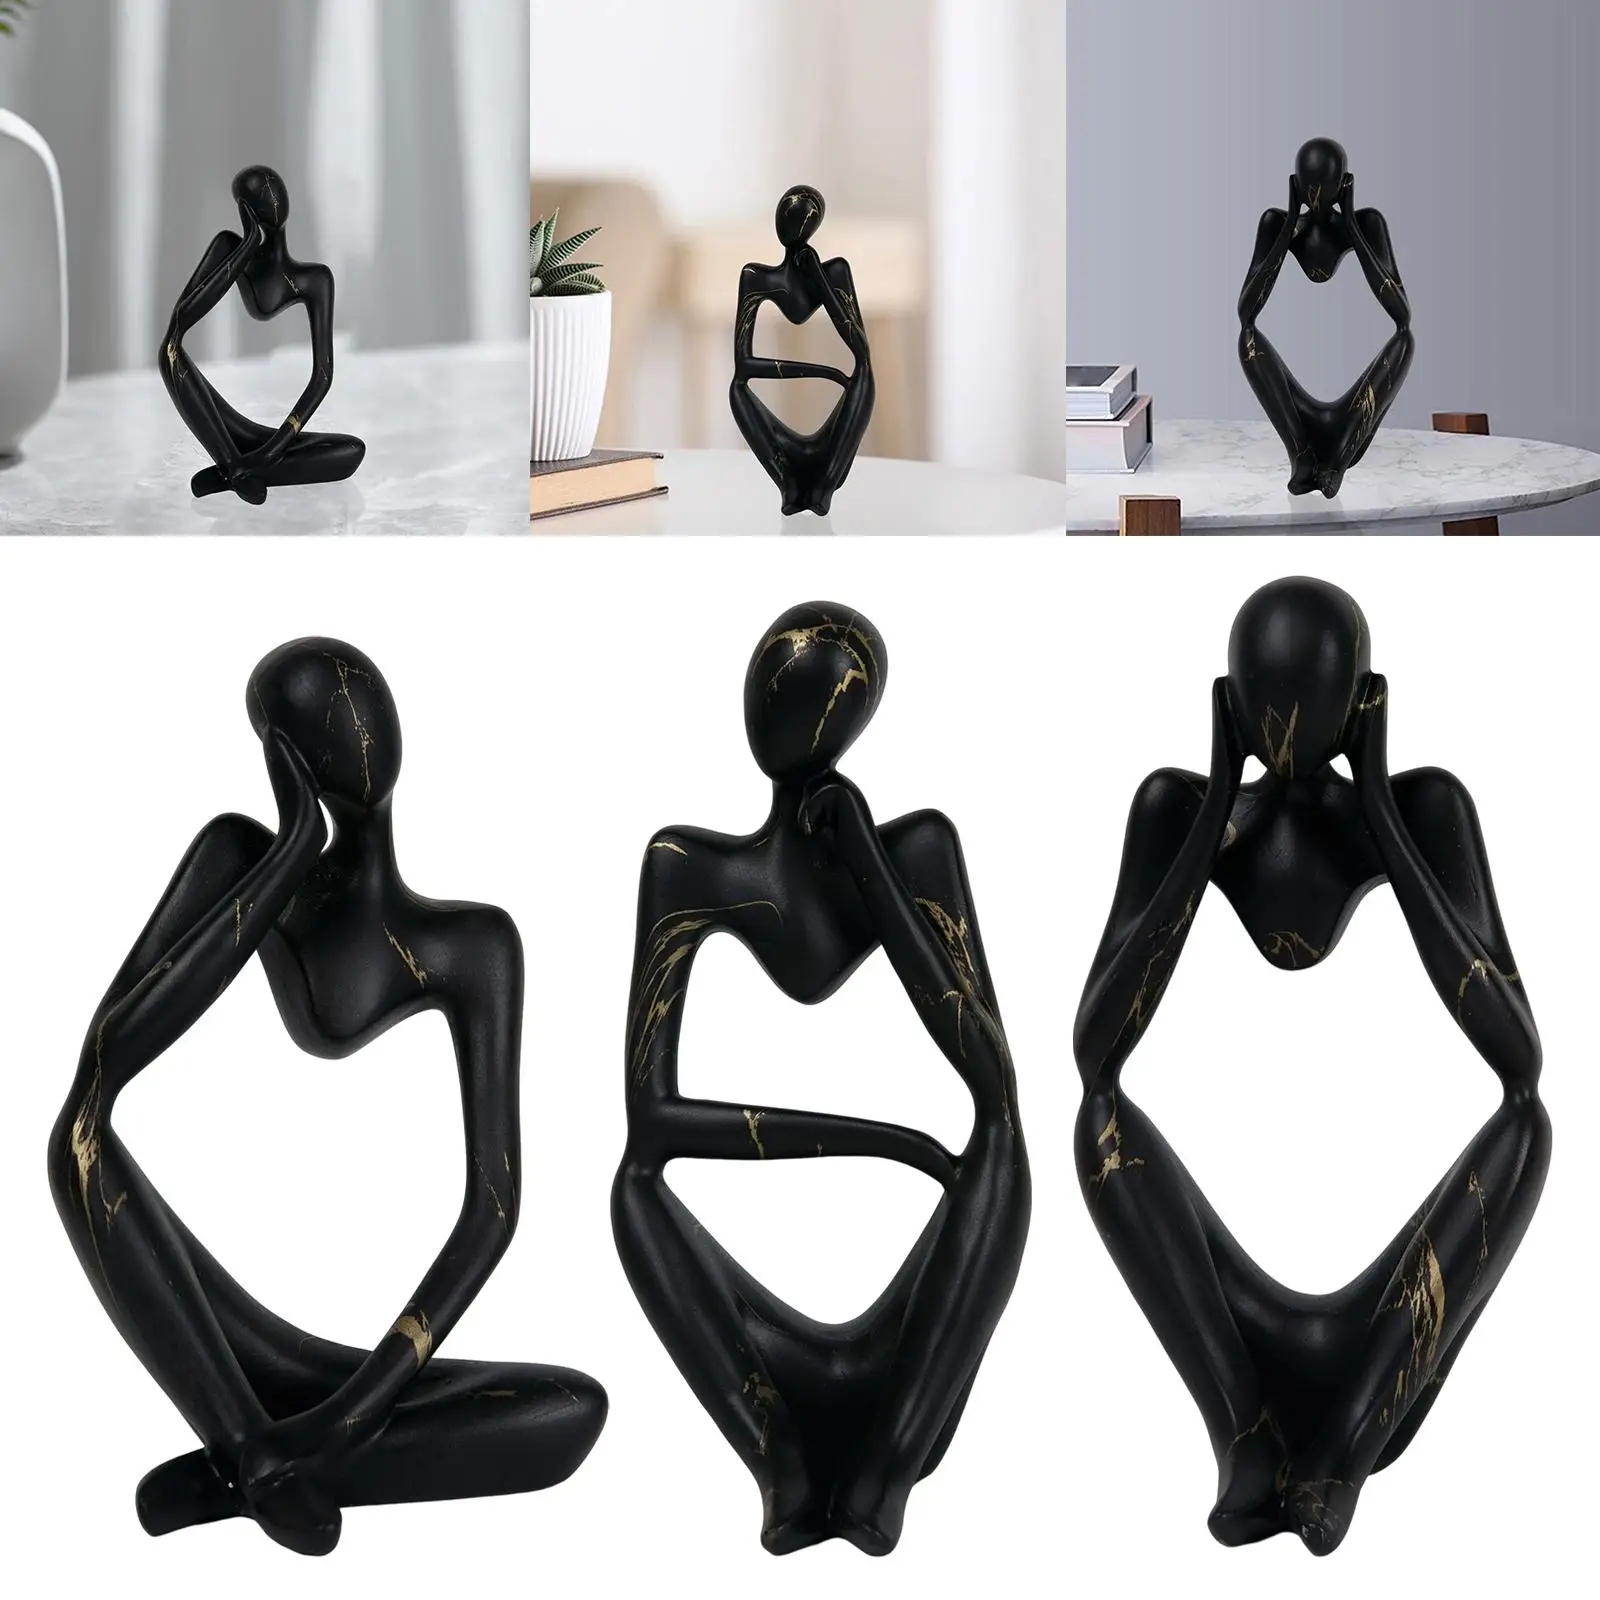 Resin Statue Thinker Style Decoration Abstract Sculptures Collectible Figurines for Home Decor Modern Office Shelf Desktop